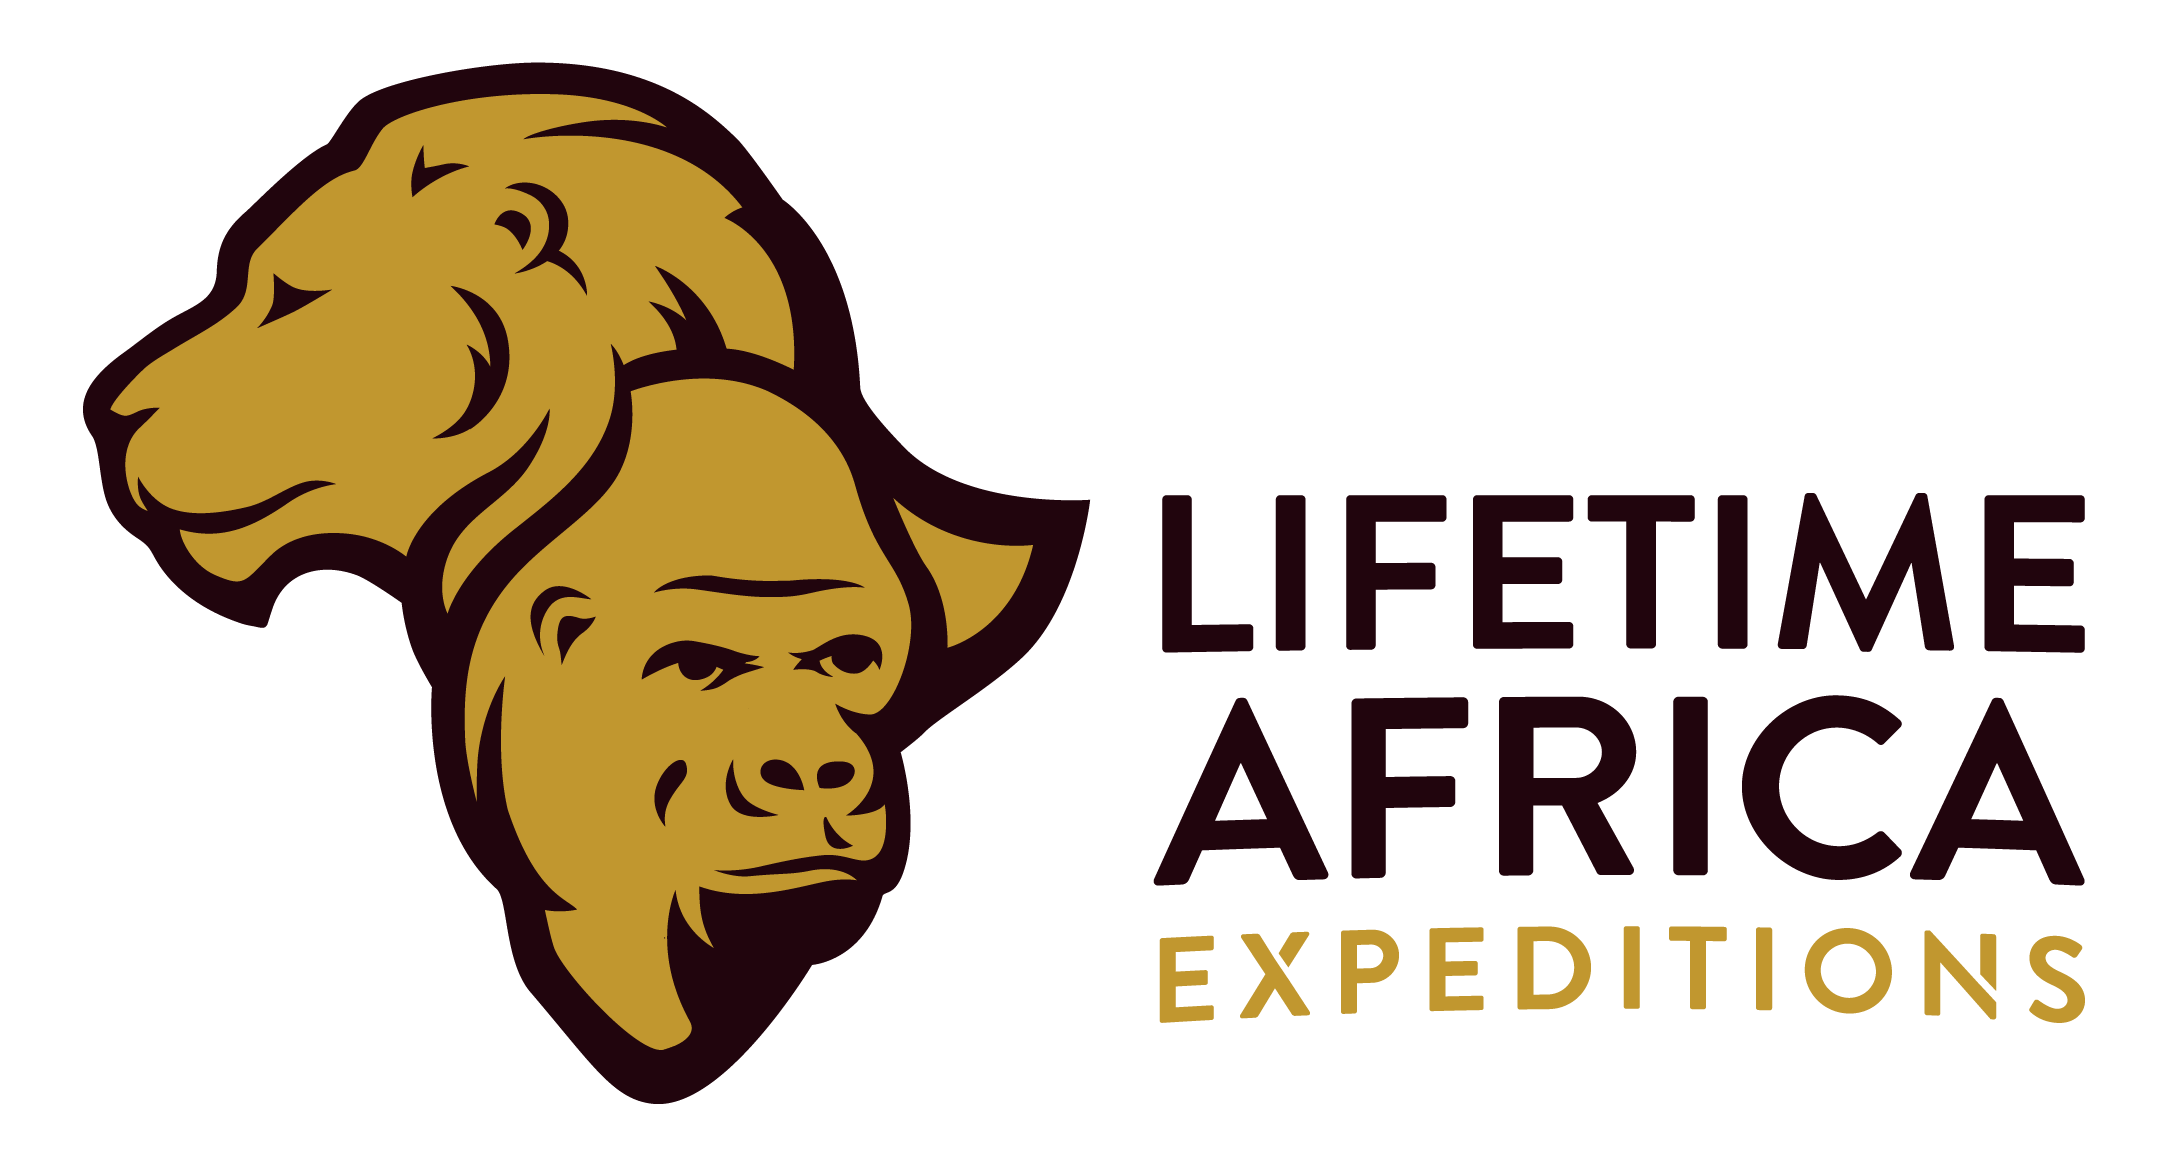 Lifetime Africa Expeditions